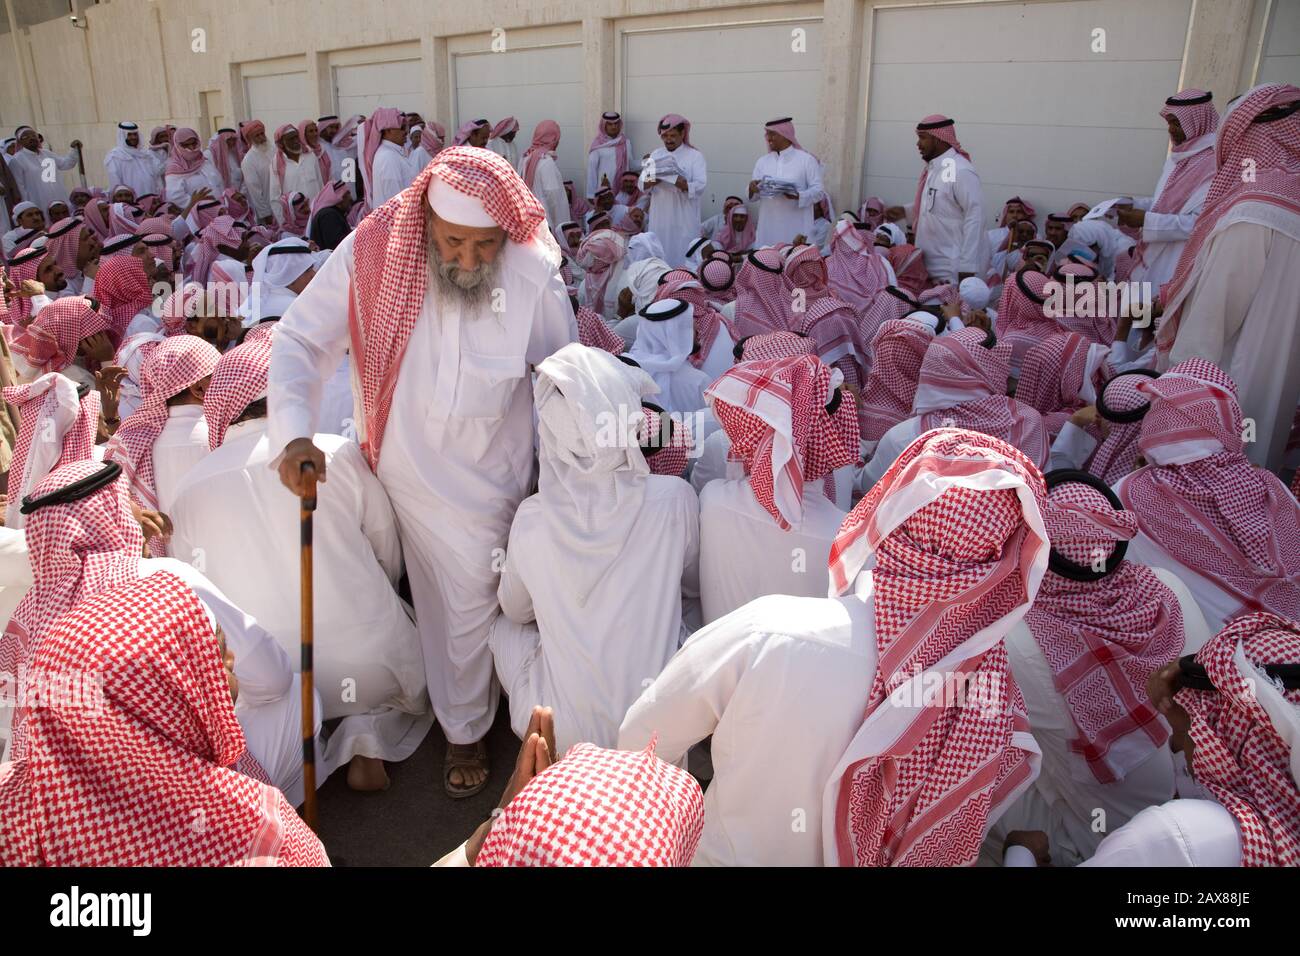 Once a week hundreds of men line up and wait with their papers for money donation for HRH Prince Al Waleed bin Talal, Saudi Arabia. Stock Photo